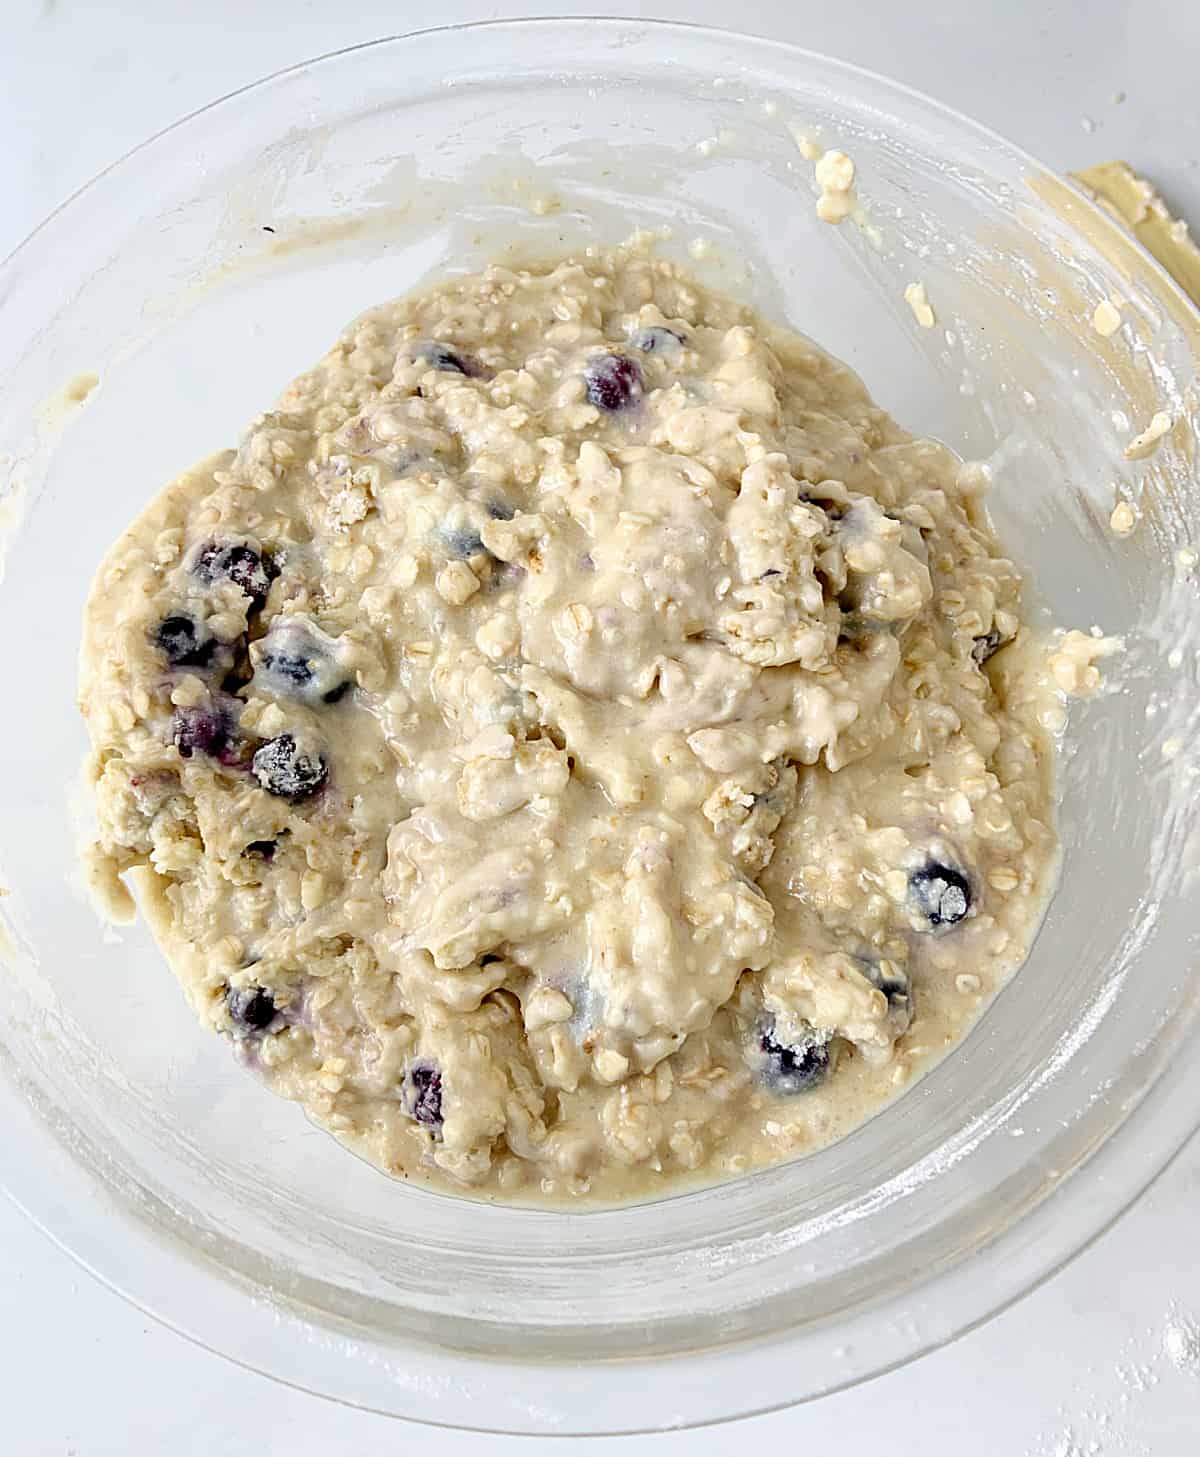 Mixed muffin batter with blueberries, glass bowl, white surface